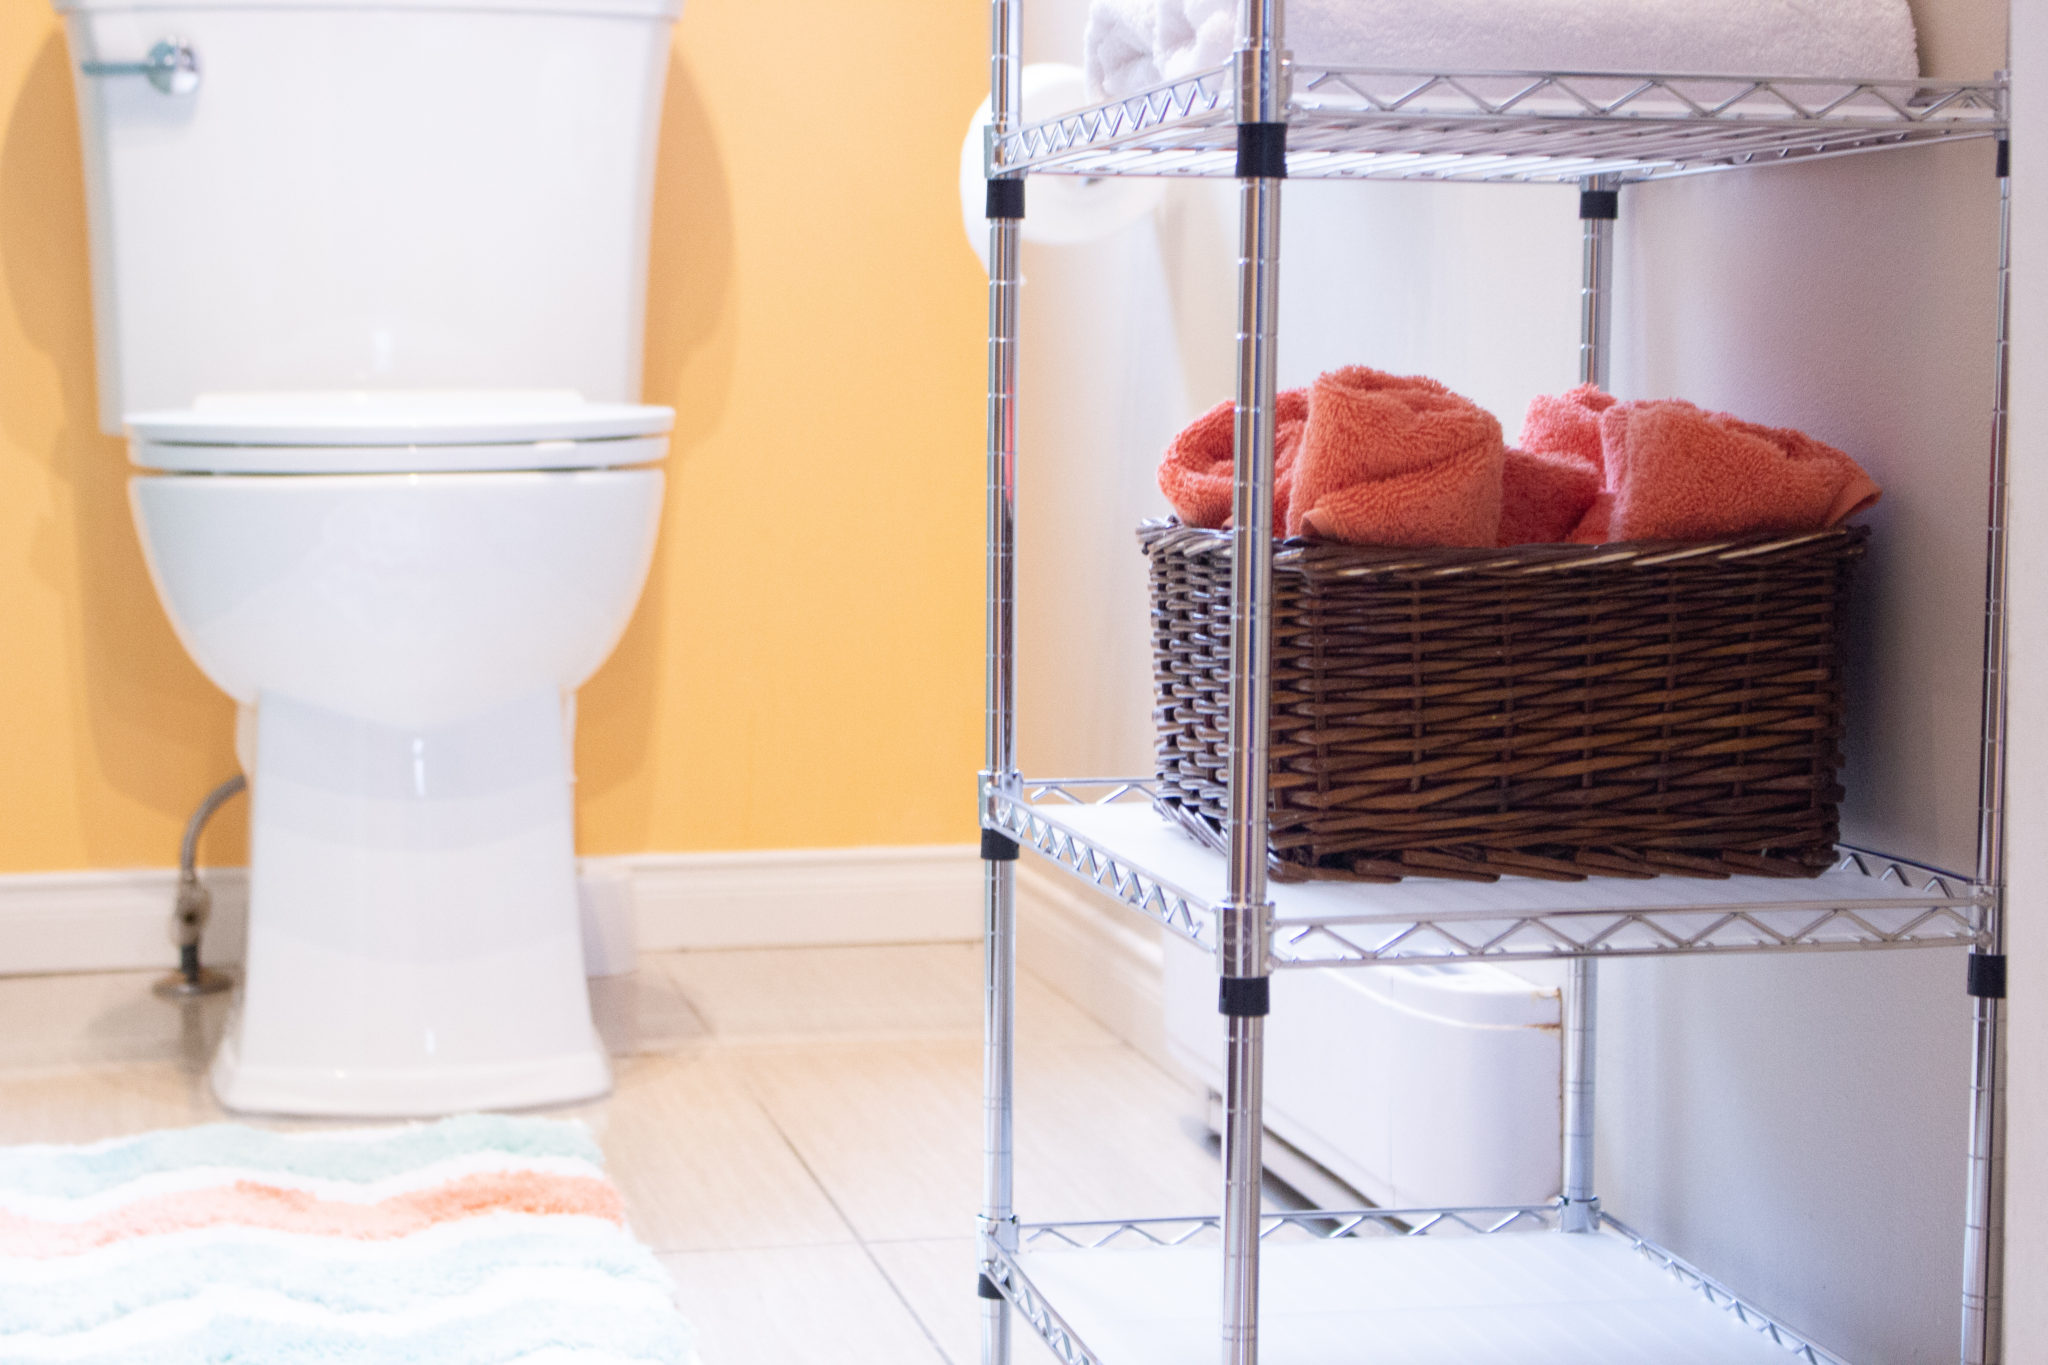 5 Simple and Inexpensive Ways to Make your Bathroom Look Better